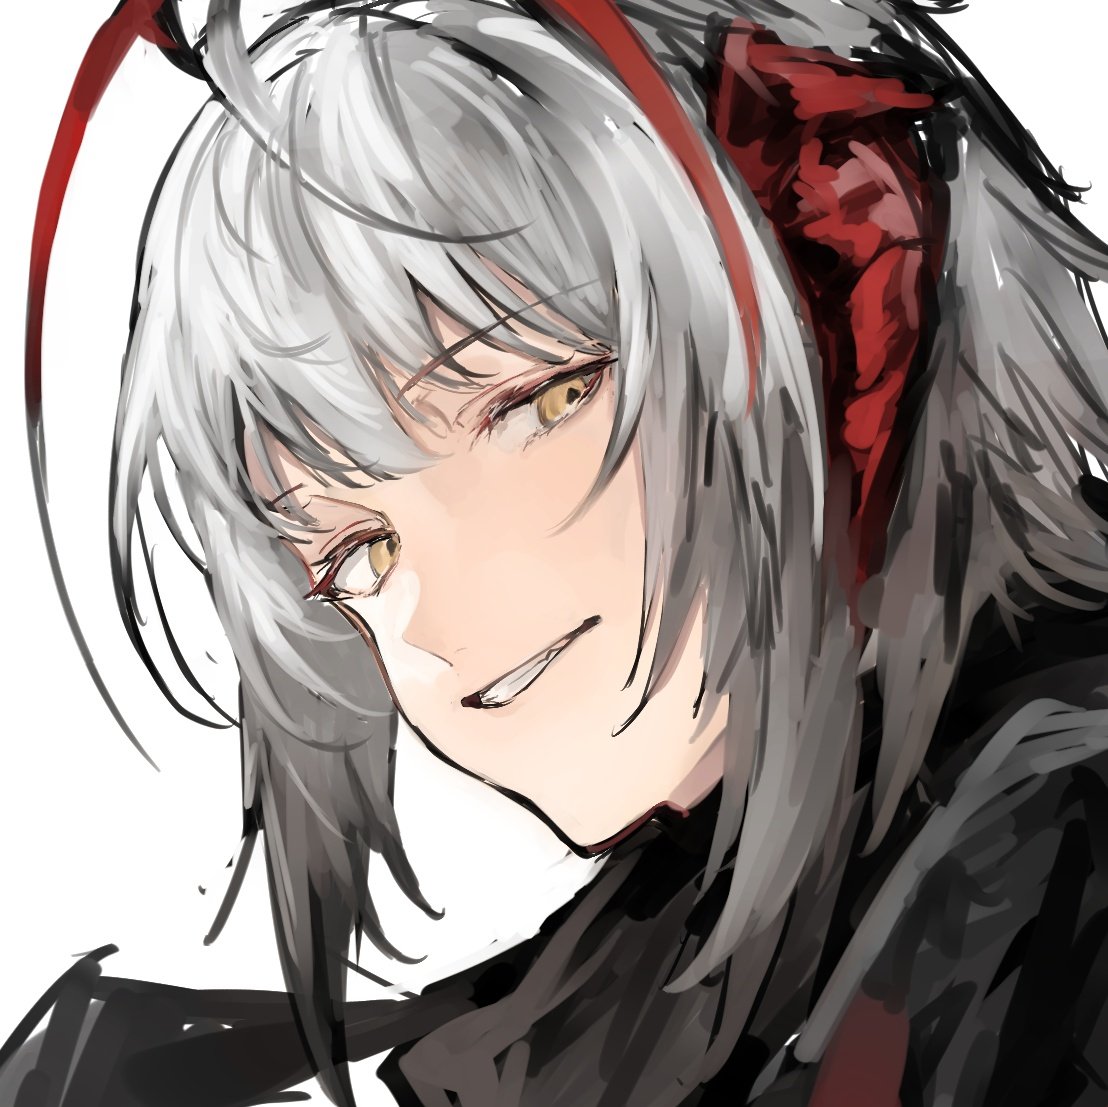 W(アークナイツ) 「#新しいプロフィール画像 」|ｼﾛｾのイラスト